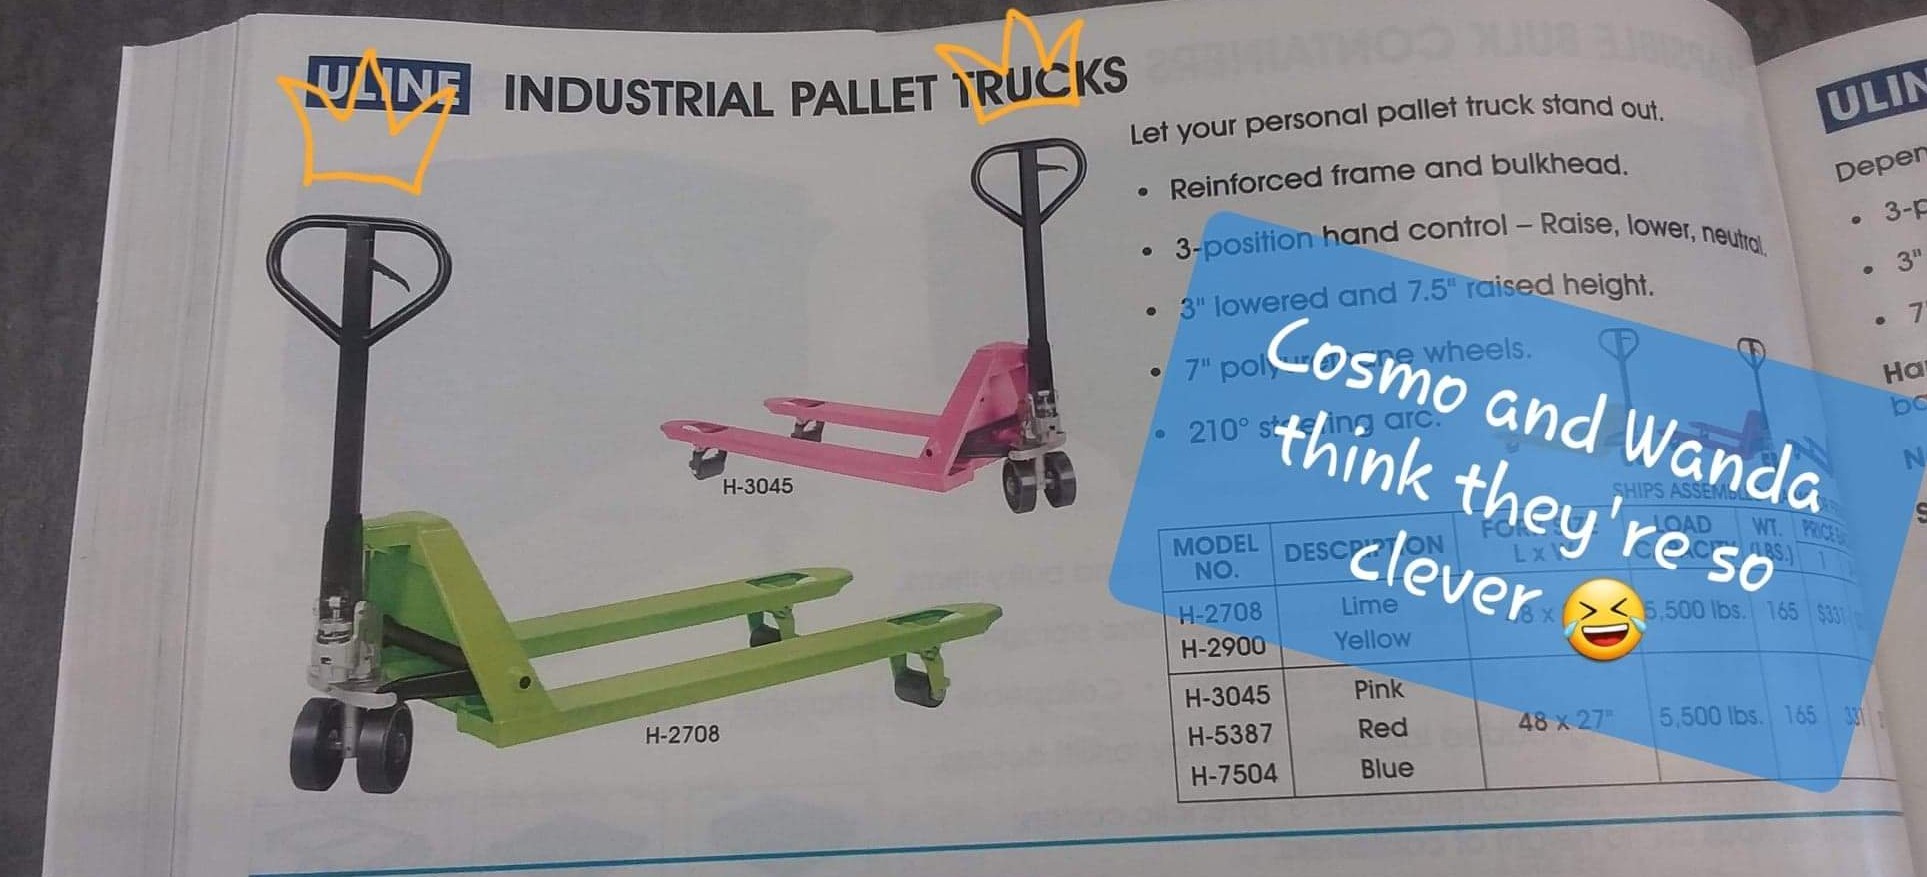 Found this in a Uline catalog - meme